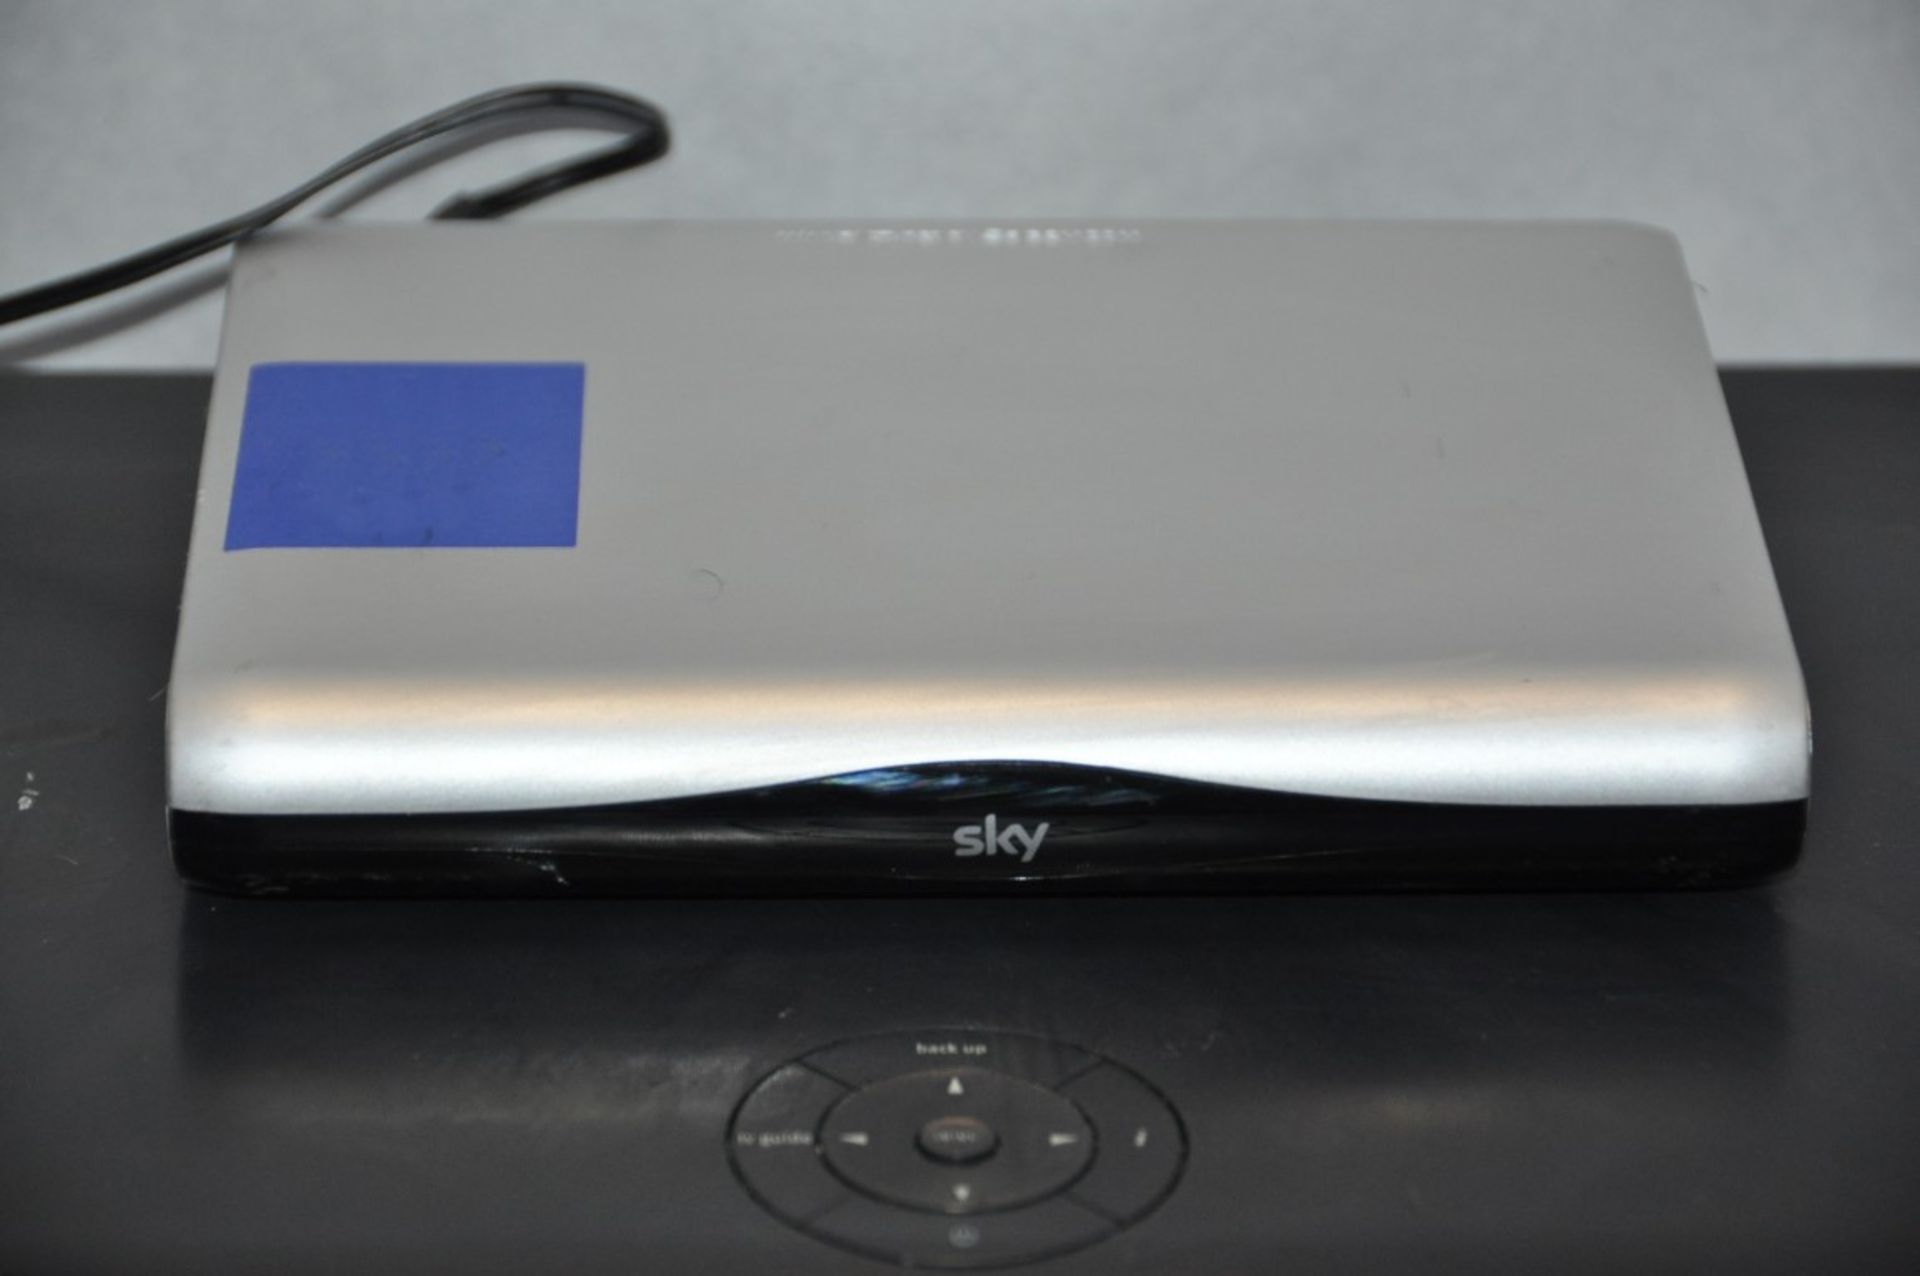 2 x Sky HD Boxes - Part Numbers 14421 and 14463 - Removed From Working Environment - CL100 - Ref - Image 3 of 3